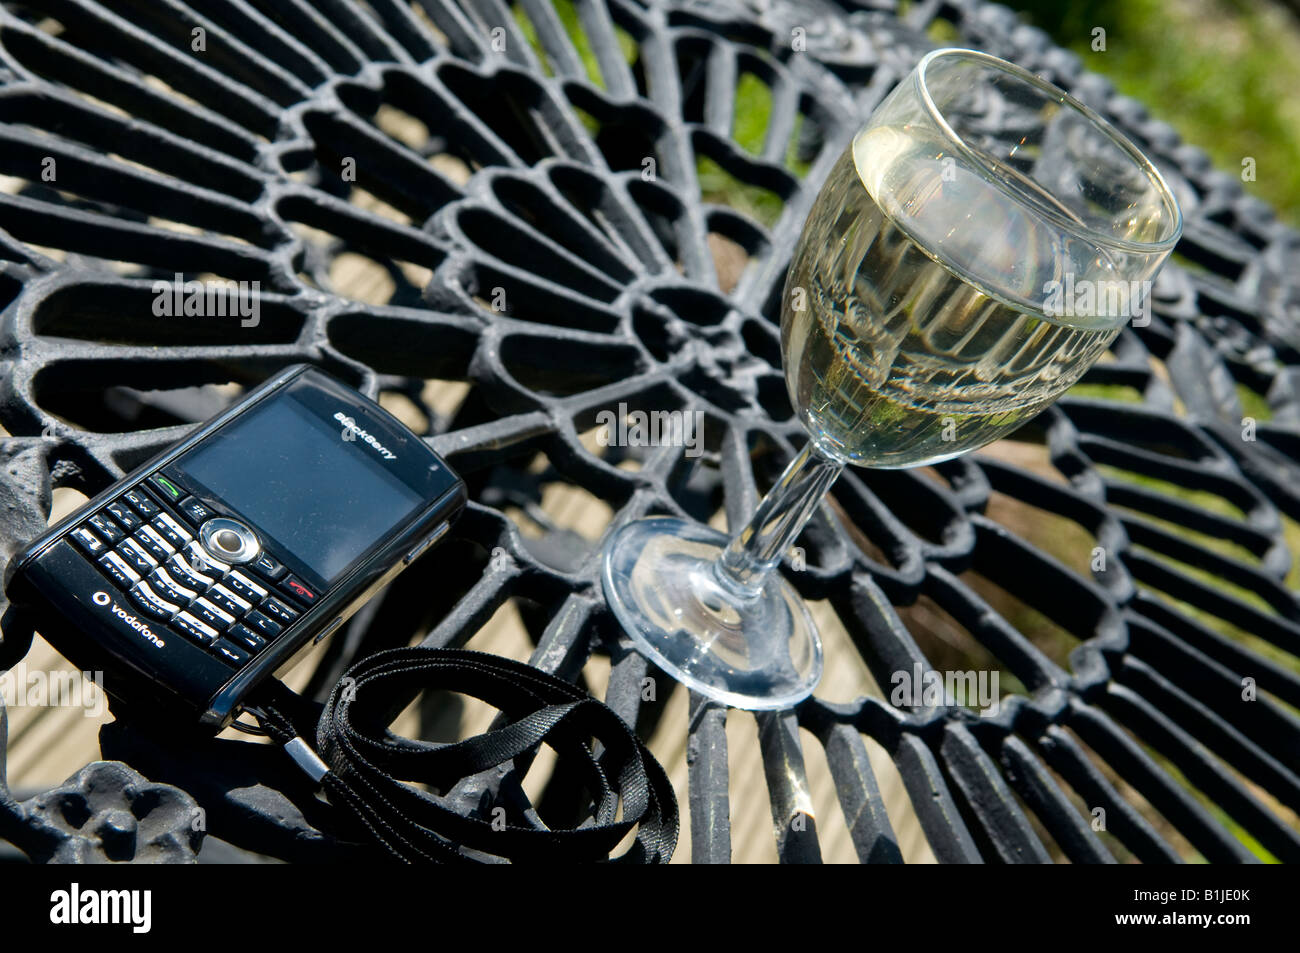 Lifestyle image of a glass of white wine and a blackberry mobile phone with email and a lanyard keys buttons Stock Photo